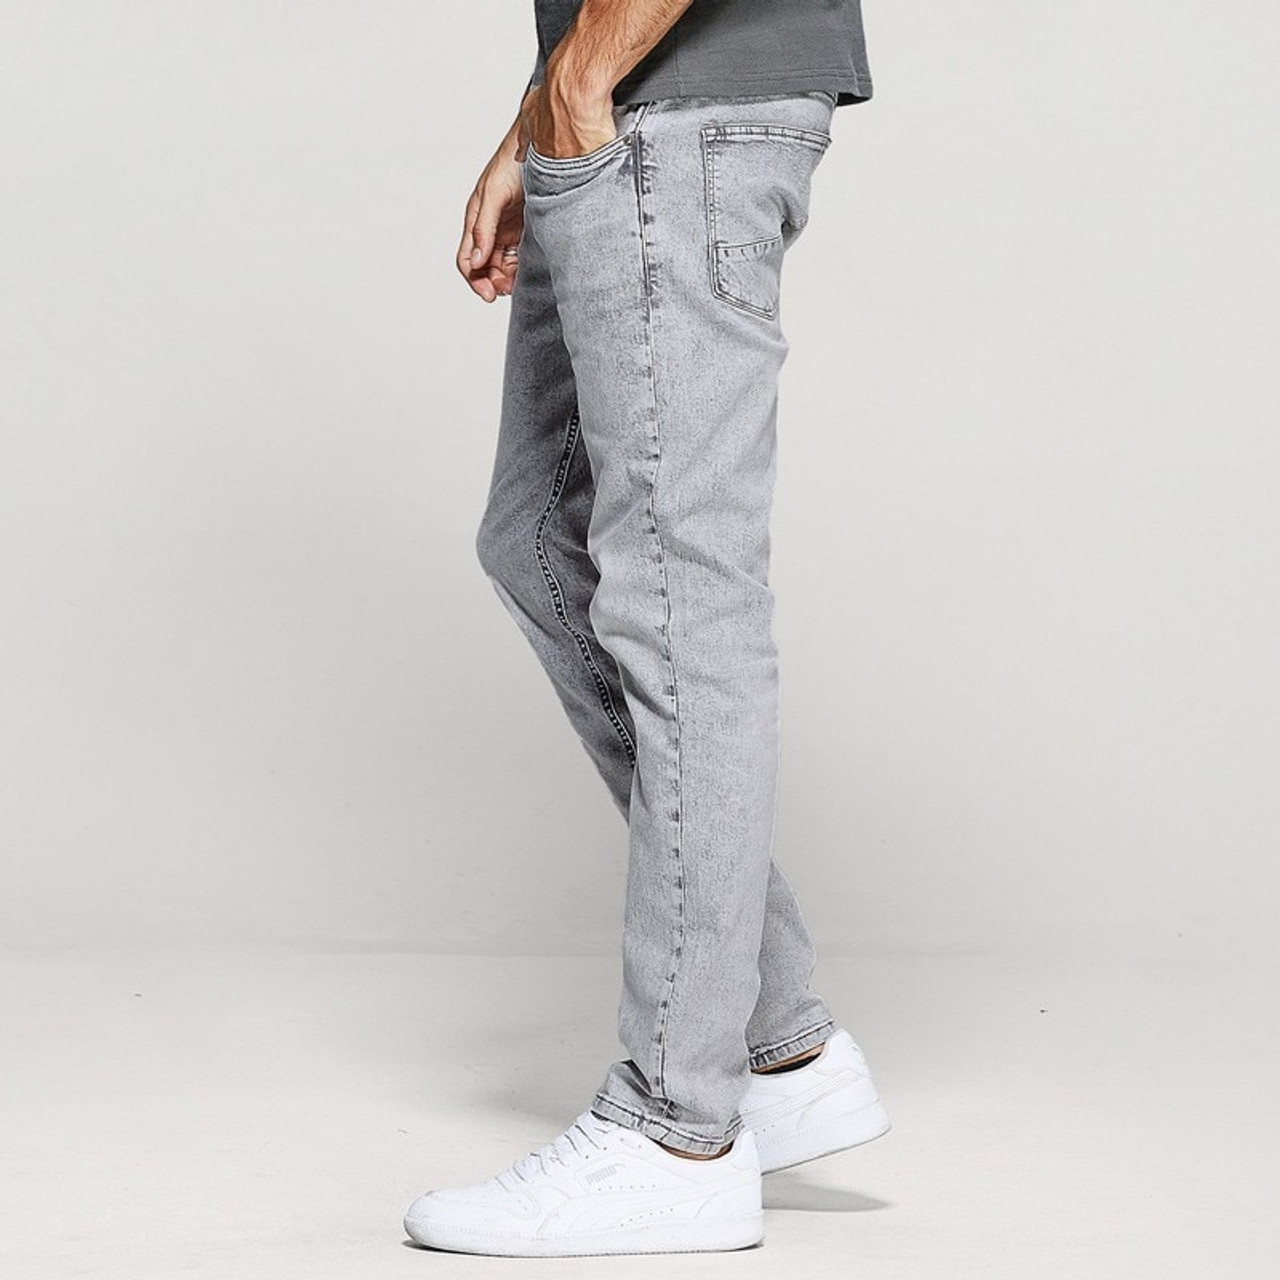 Plain Dyed Washed Grey Color Shaded Jogger Style Jeans For Kids Age Group  12 Years at Best Price in Kolkata  Vansh Traders